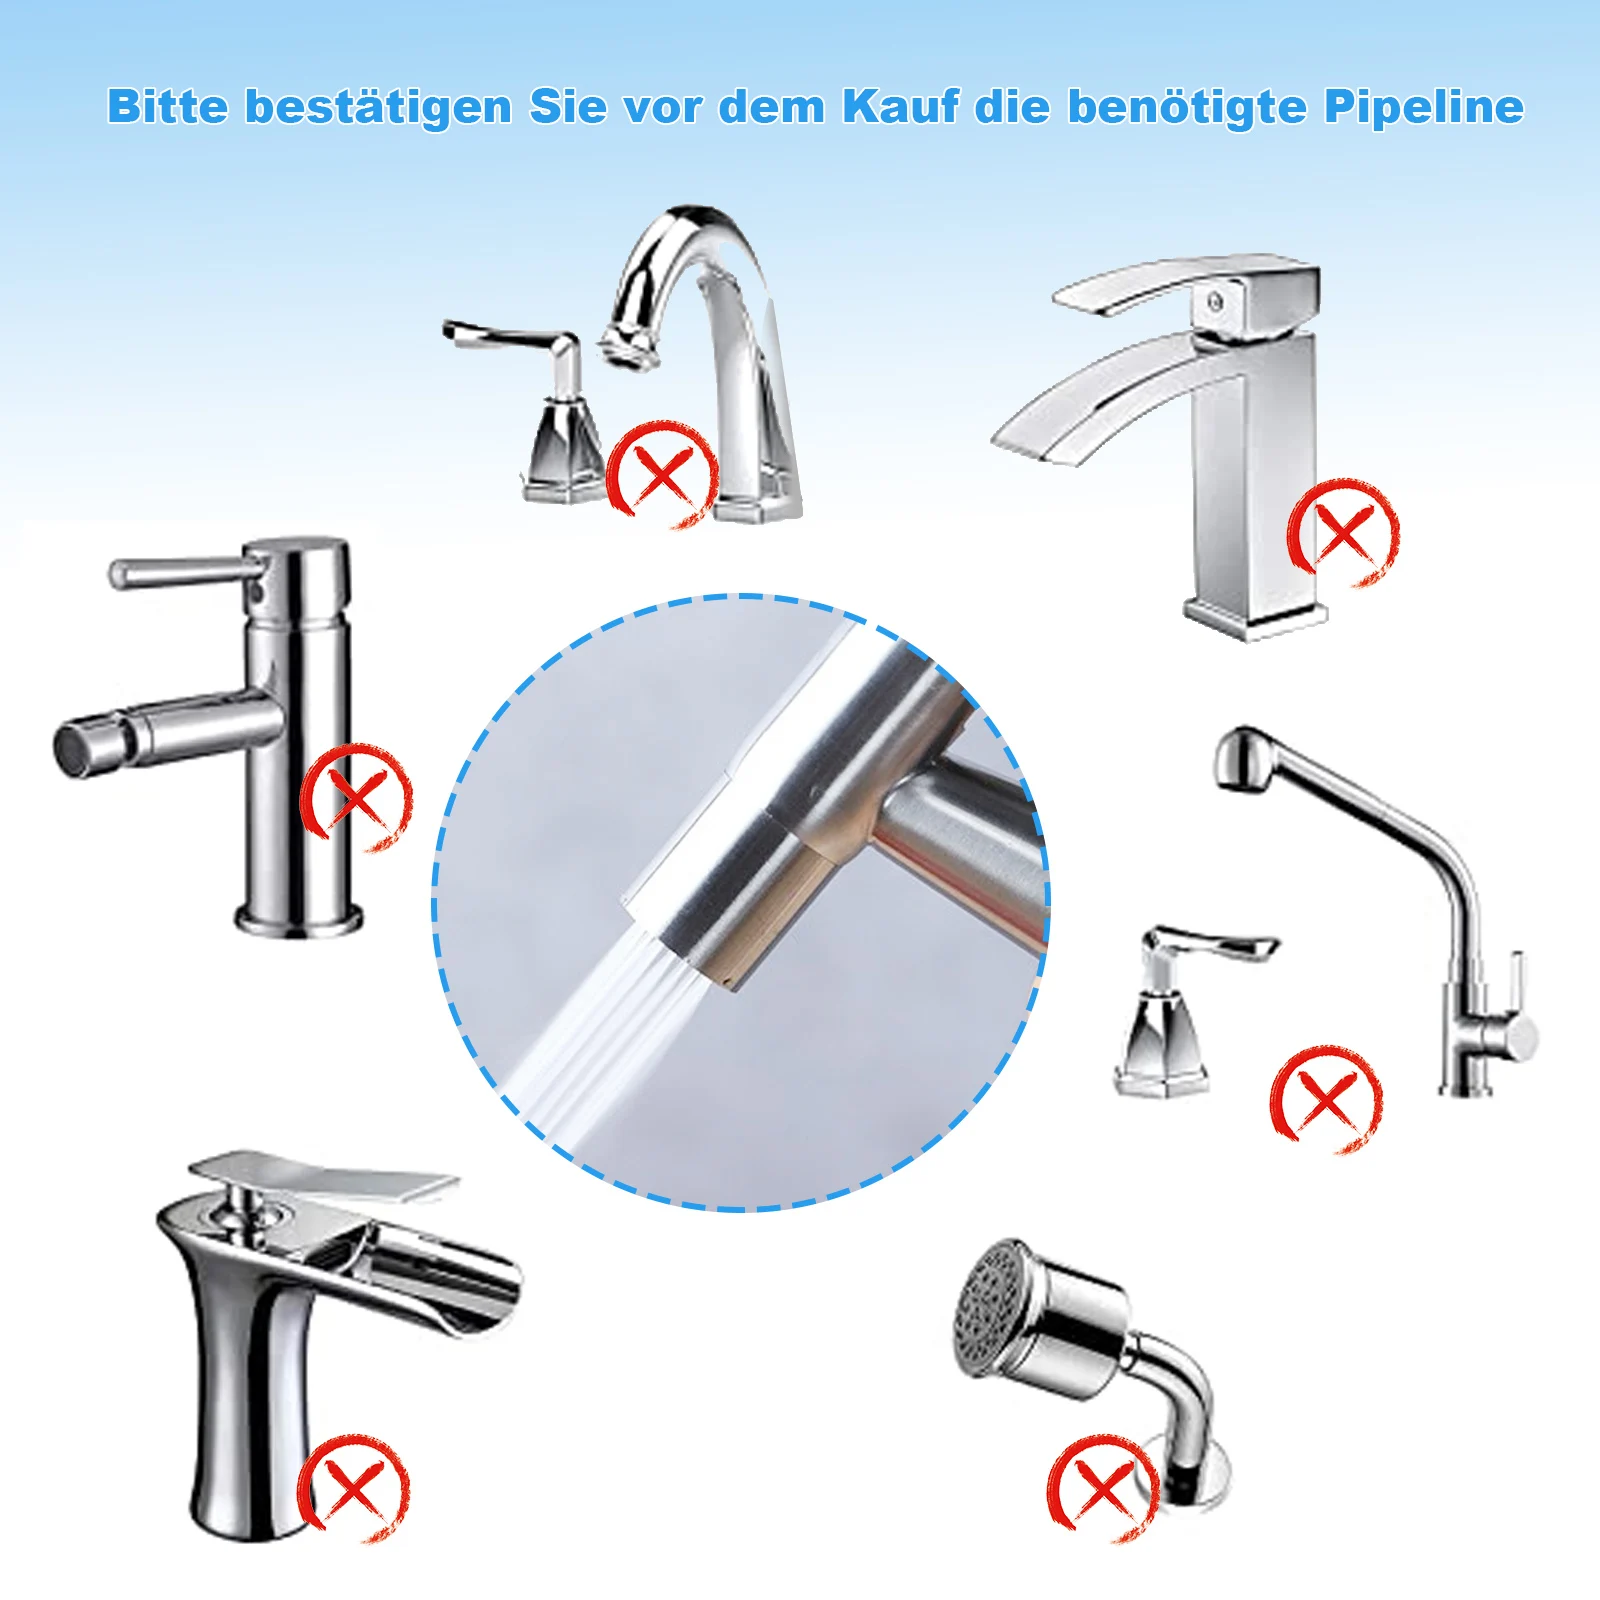 

2Pcs Women Bidet Faucets Handheld Stainless Washing Device Leakproof Adults Indoor Cleaning Tools Home Shower Equipment